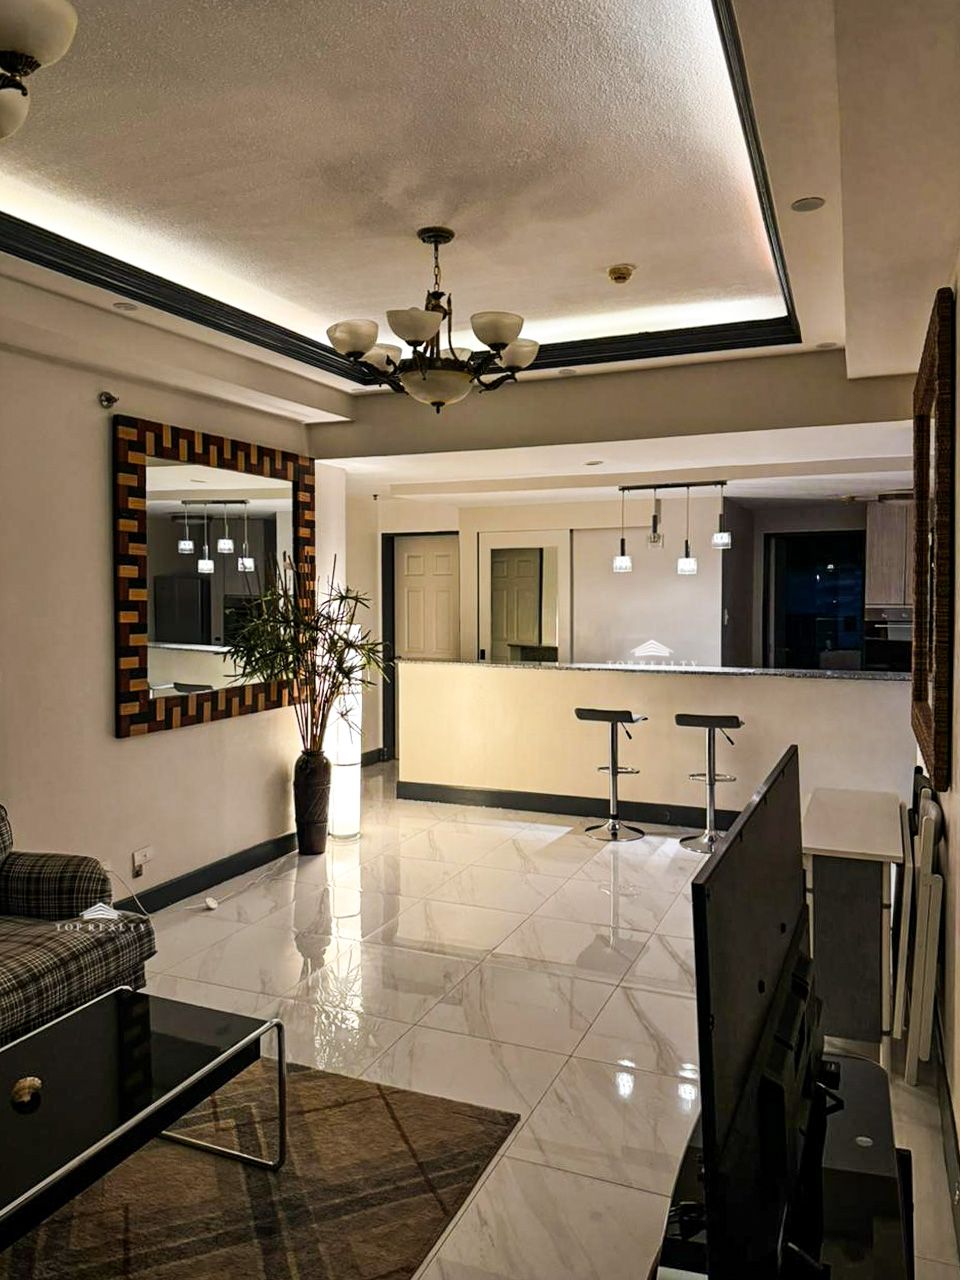 For Rent: 2BR Condo in Bellagio Tower One at BGC, Taguig City